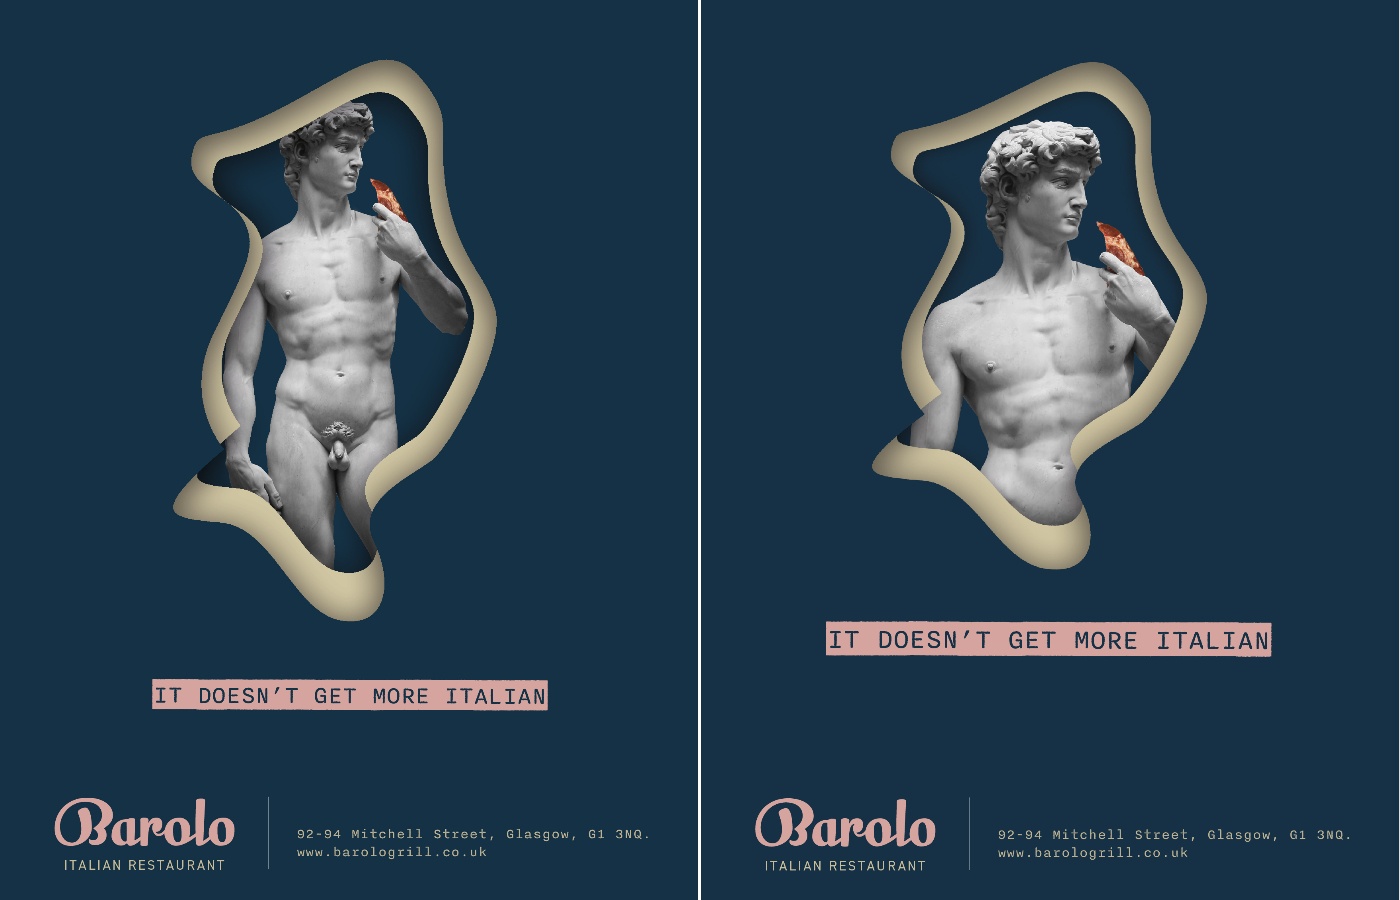 Barolo had to redesign the original advert (left) and the statue of David is now cropped at the waist.